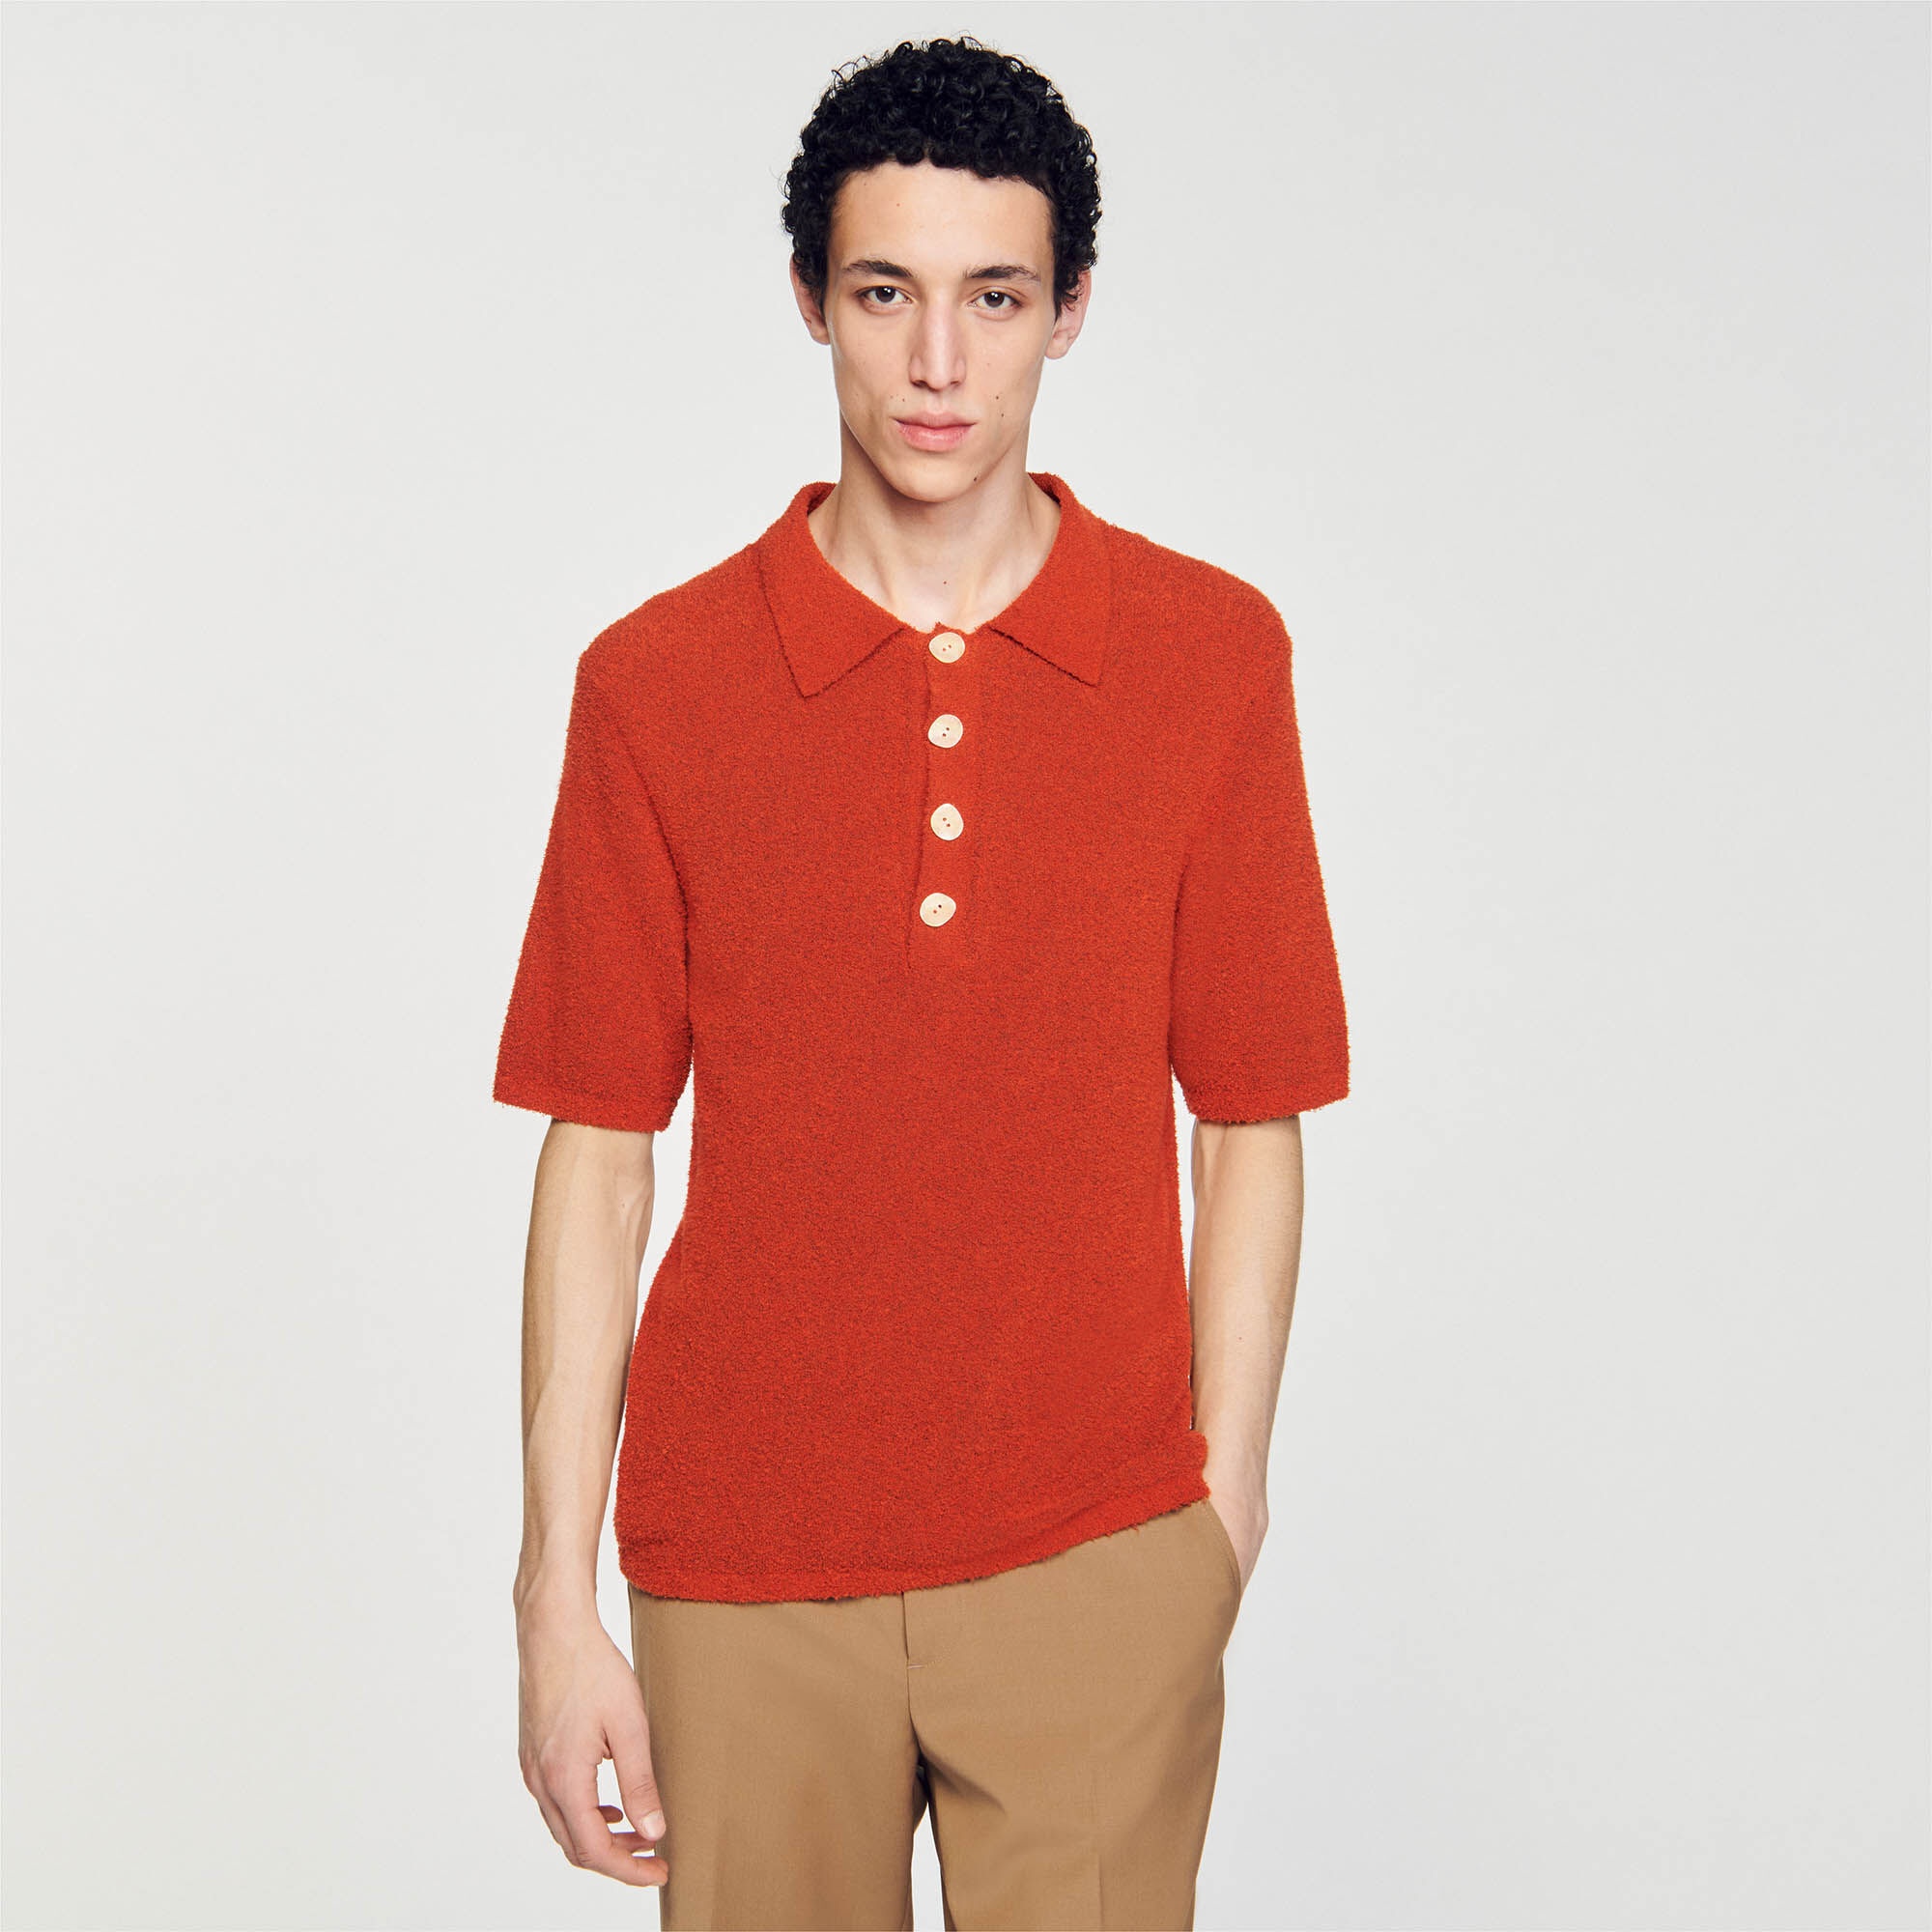 TERRY KNIT POLO SHIRT - 5